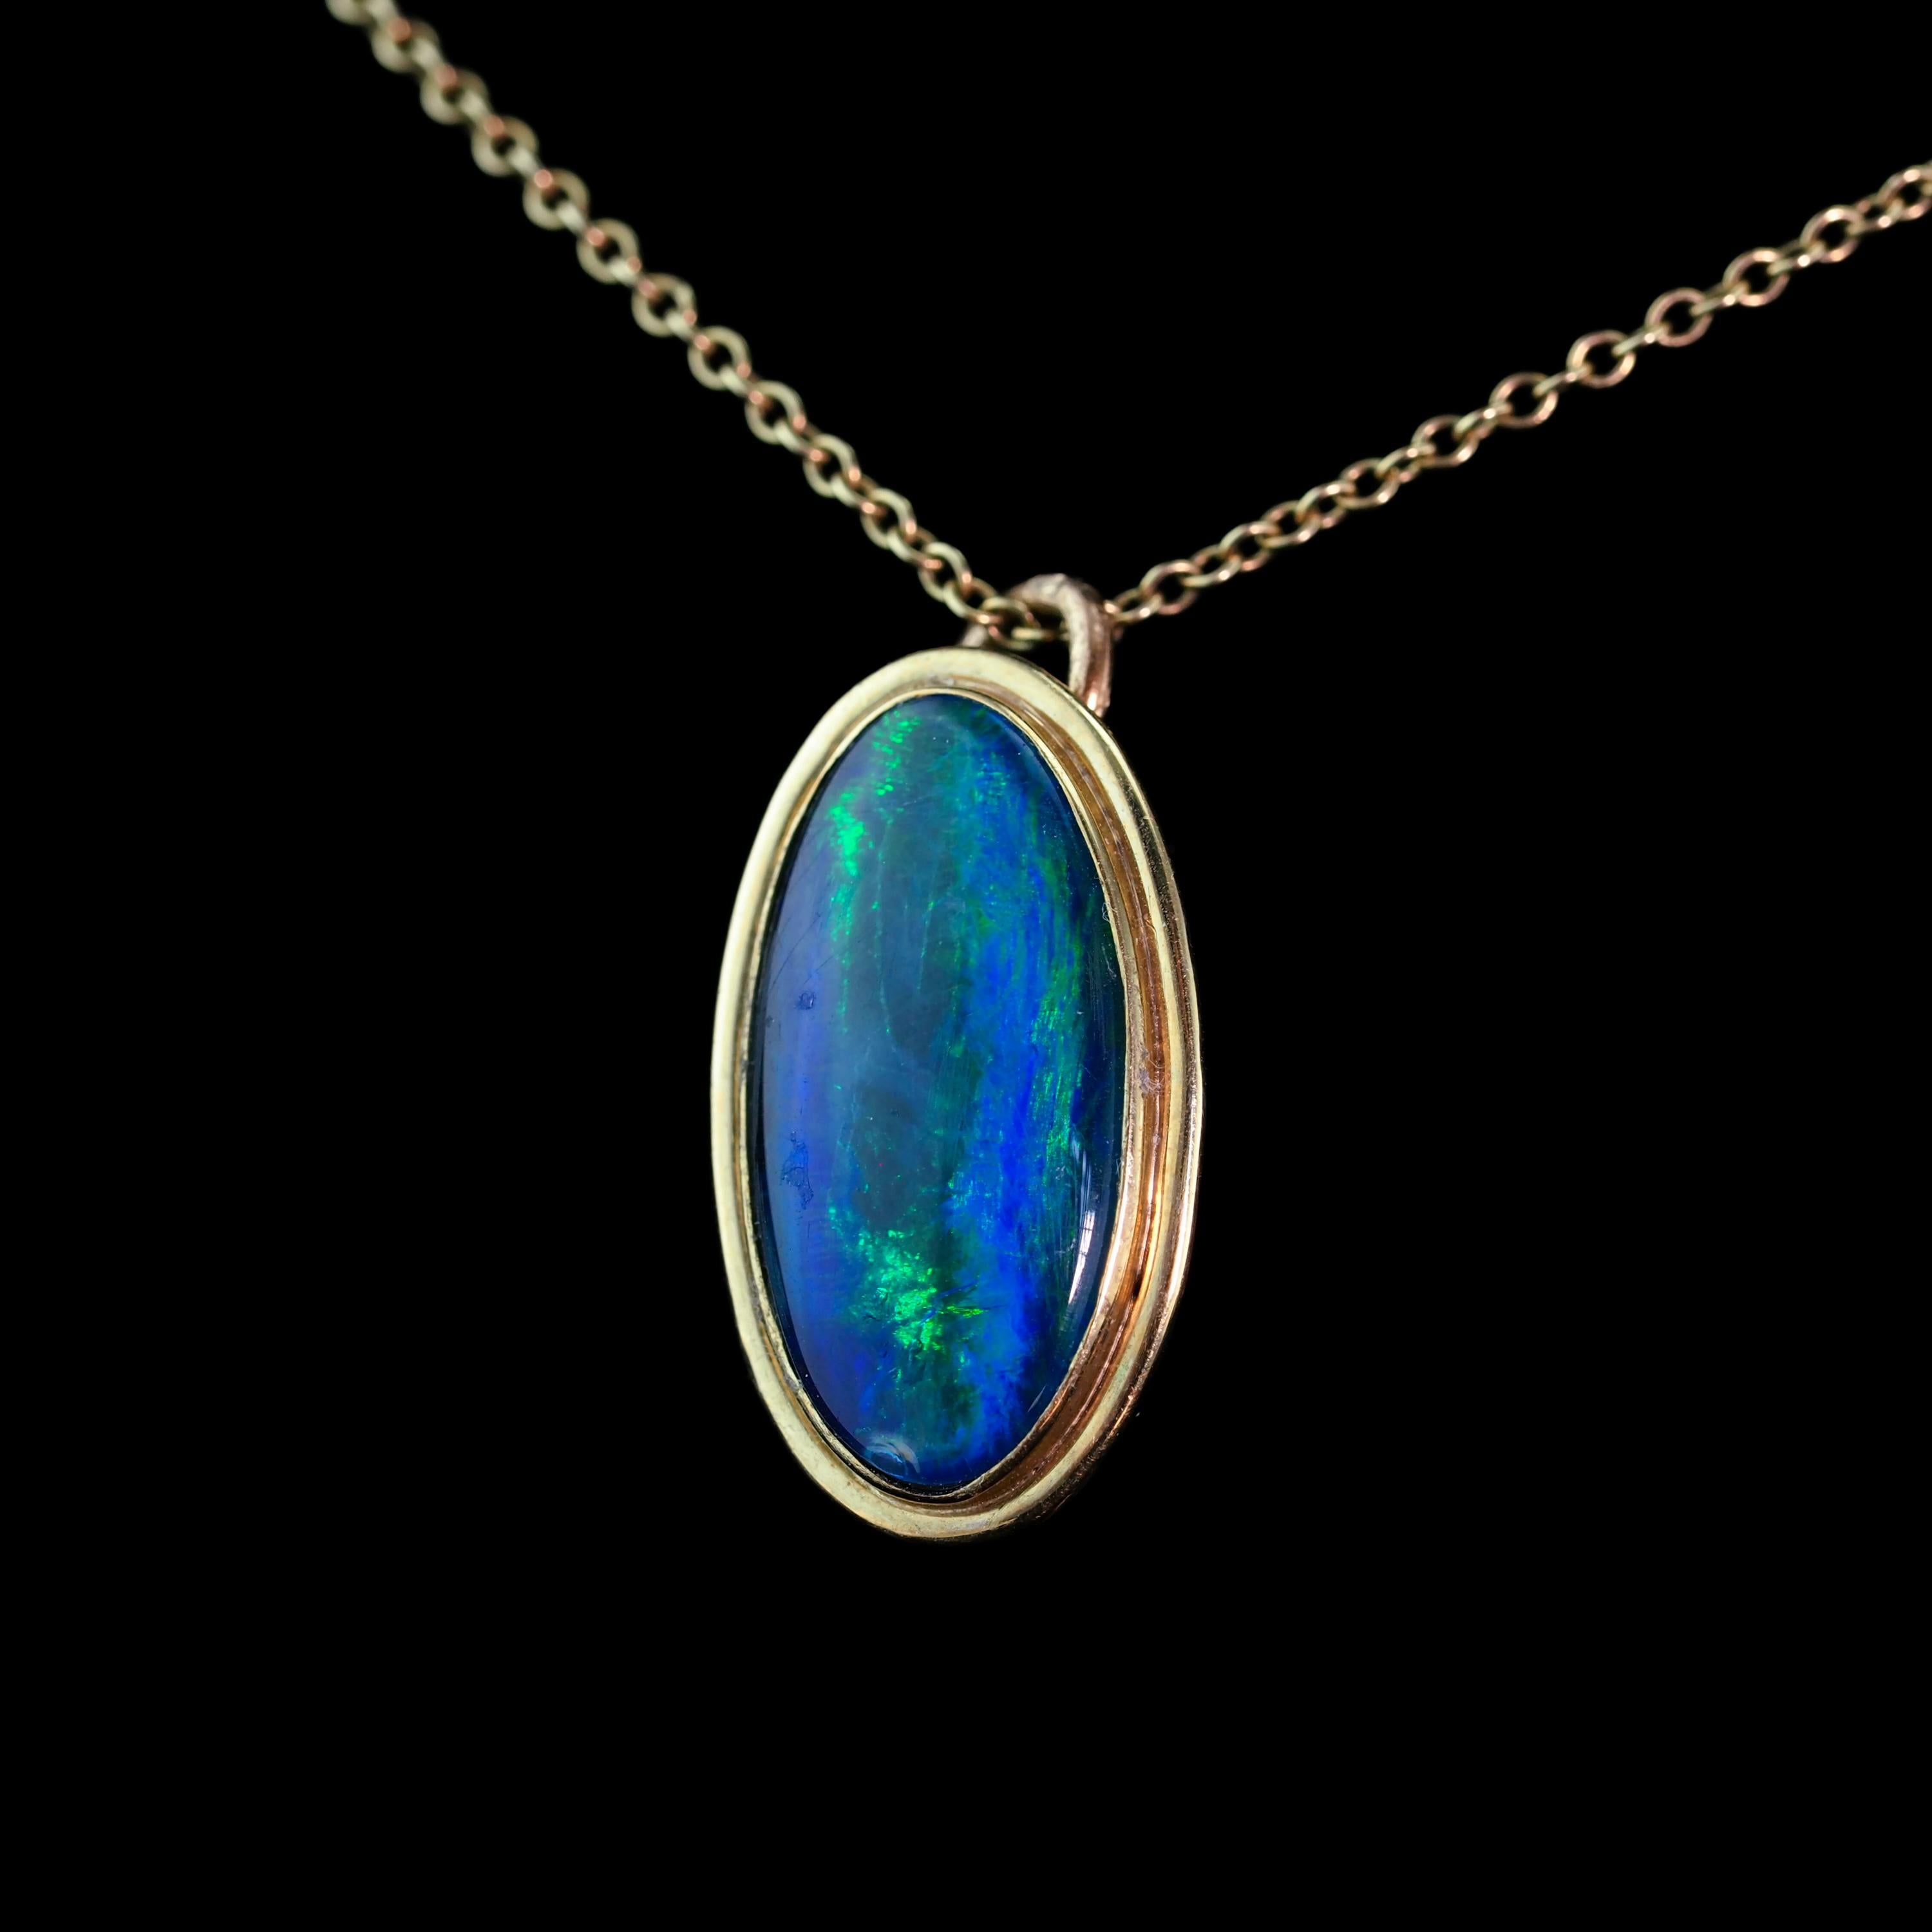 9K Gold Blue/Green Ammolite Pendant & Chain Necklace For Sale 4